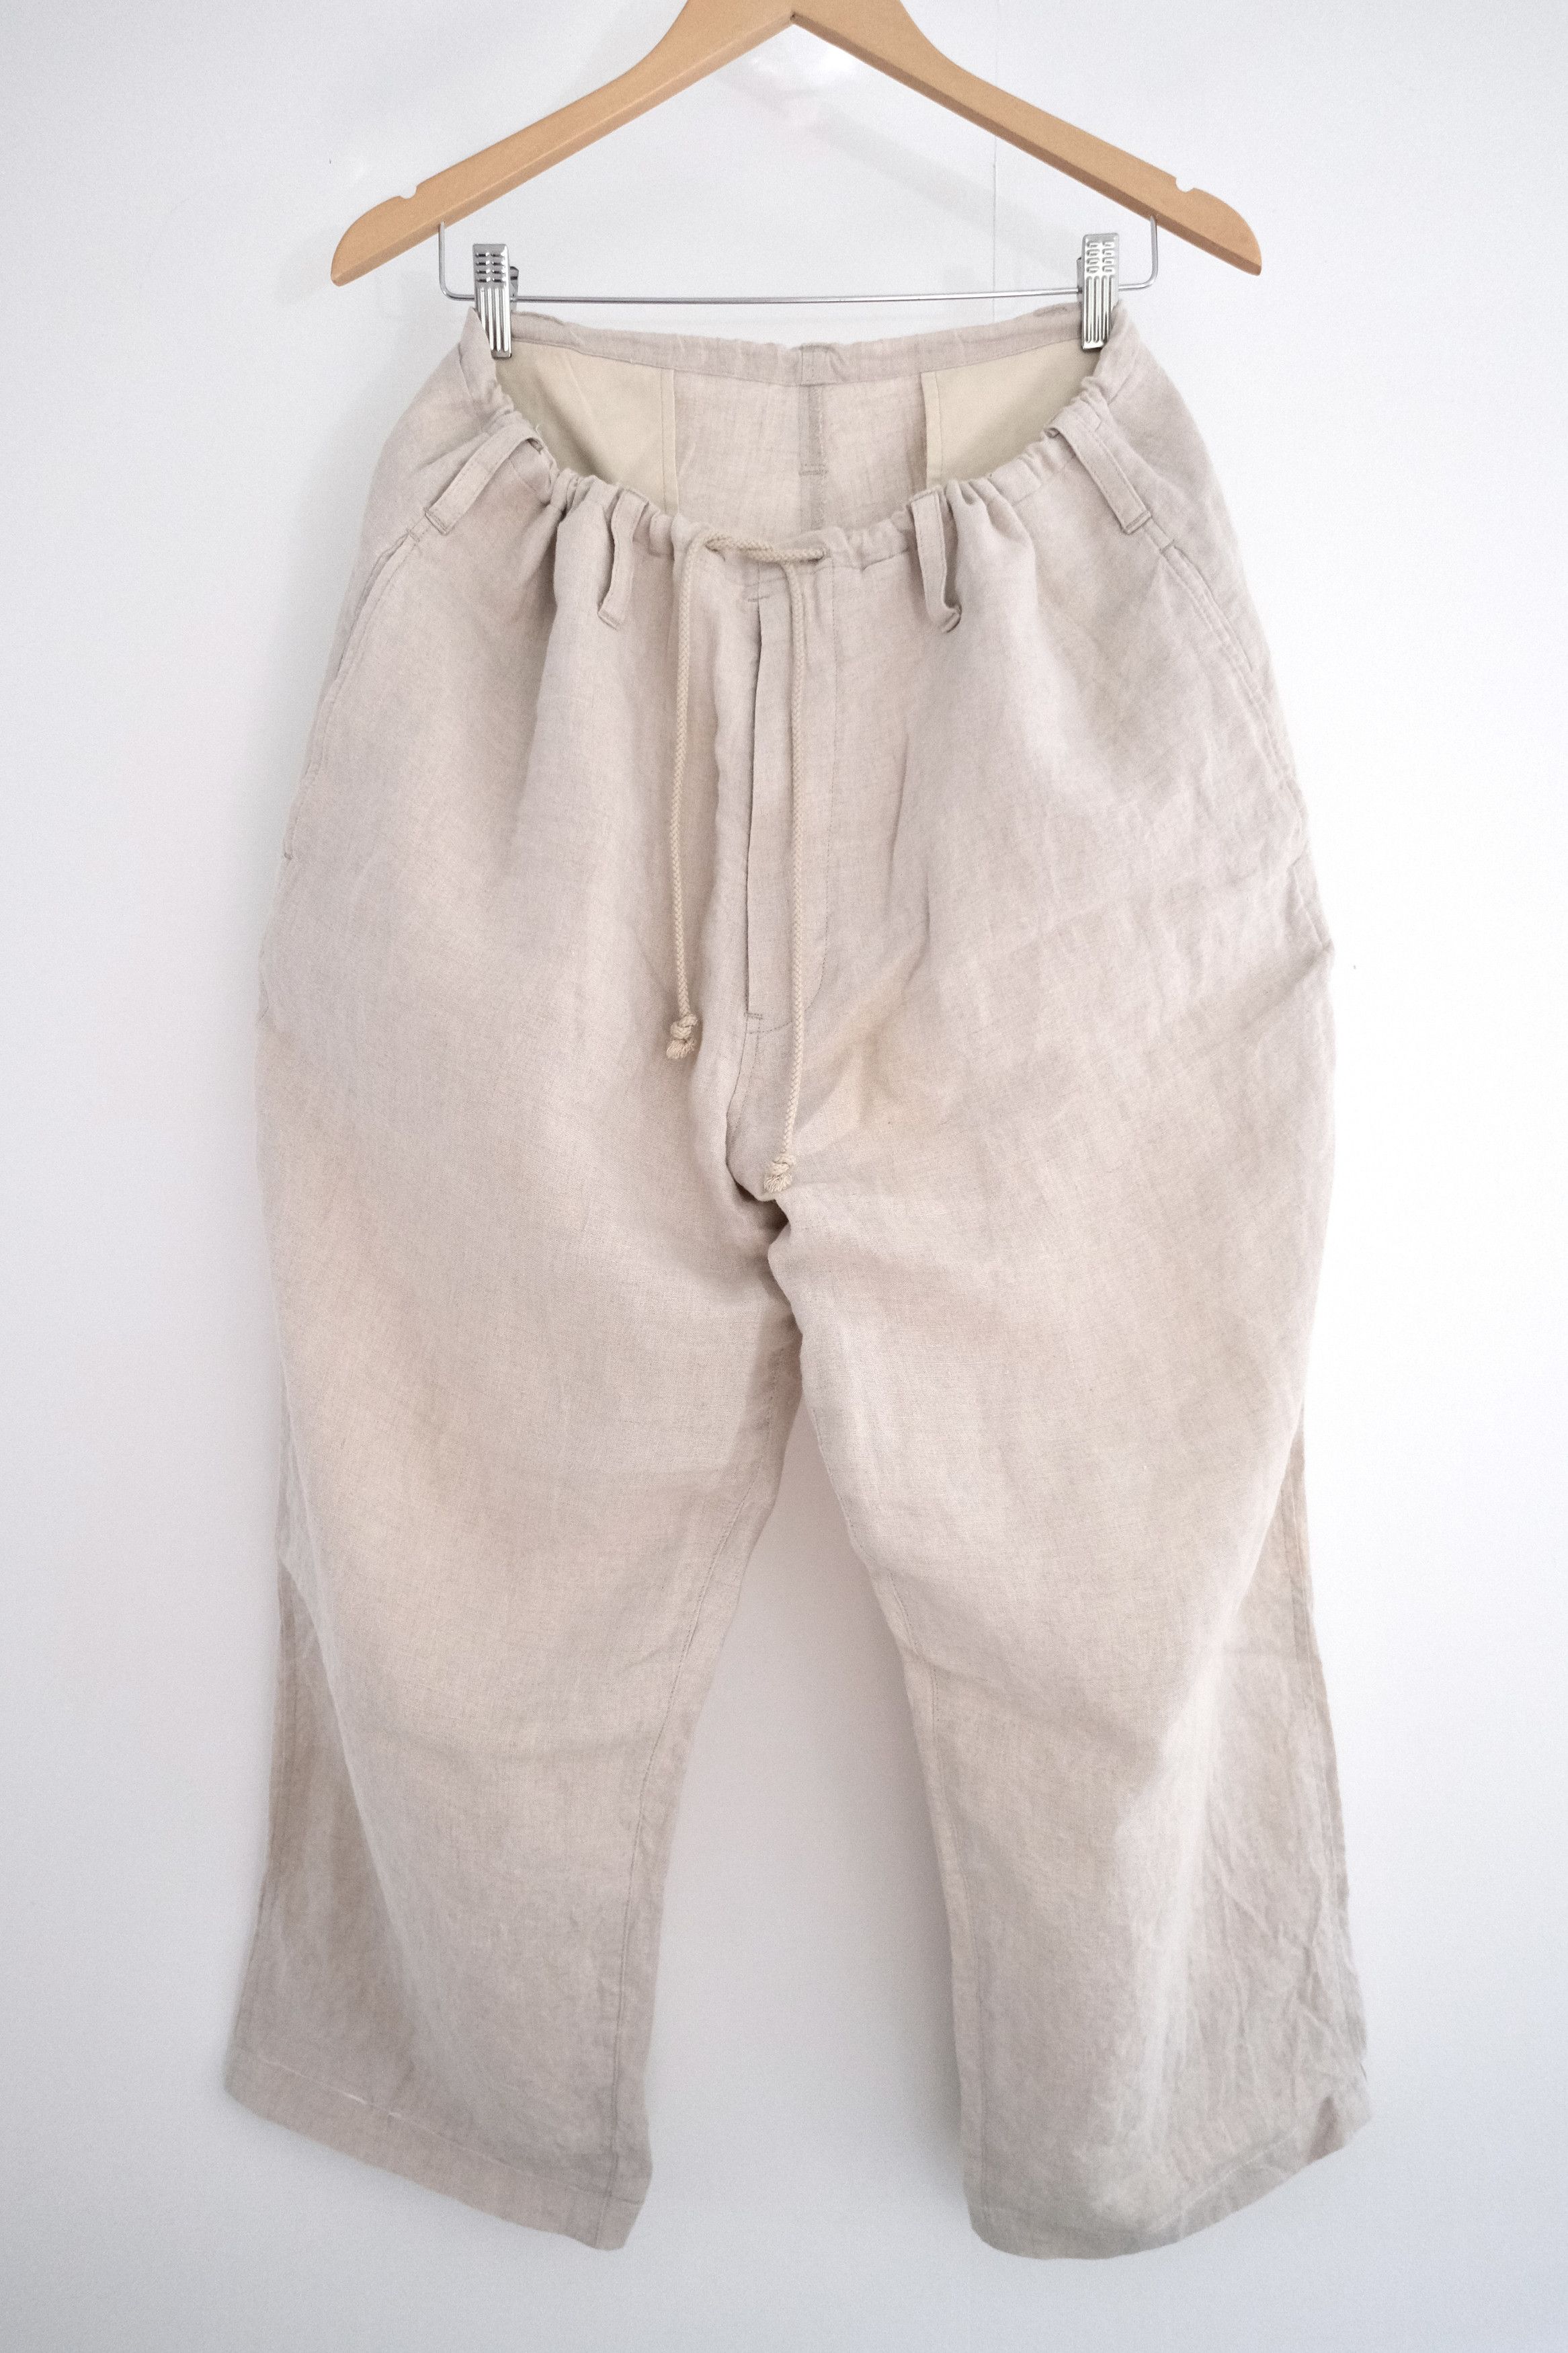 🎐 YYPH SS18 Wide Drawstring Linen Easy Pants - 11